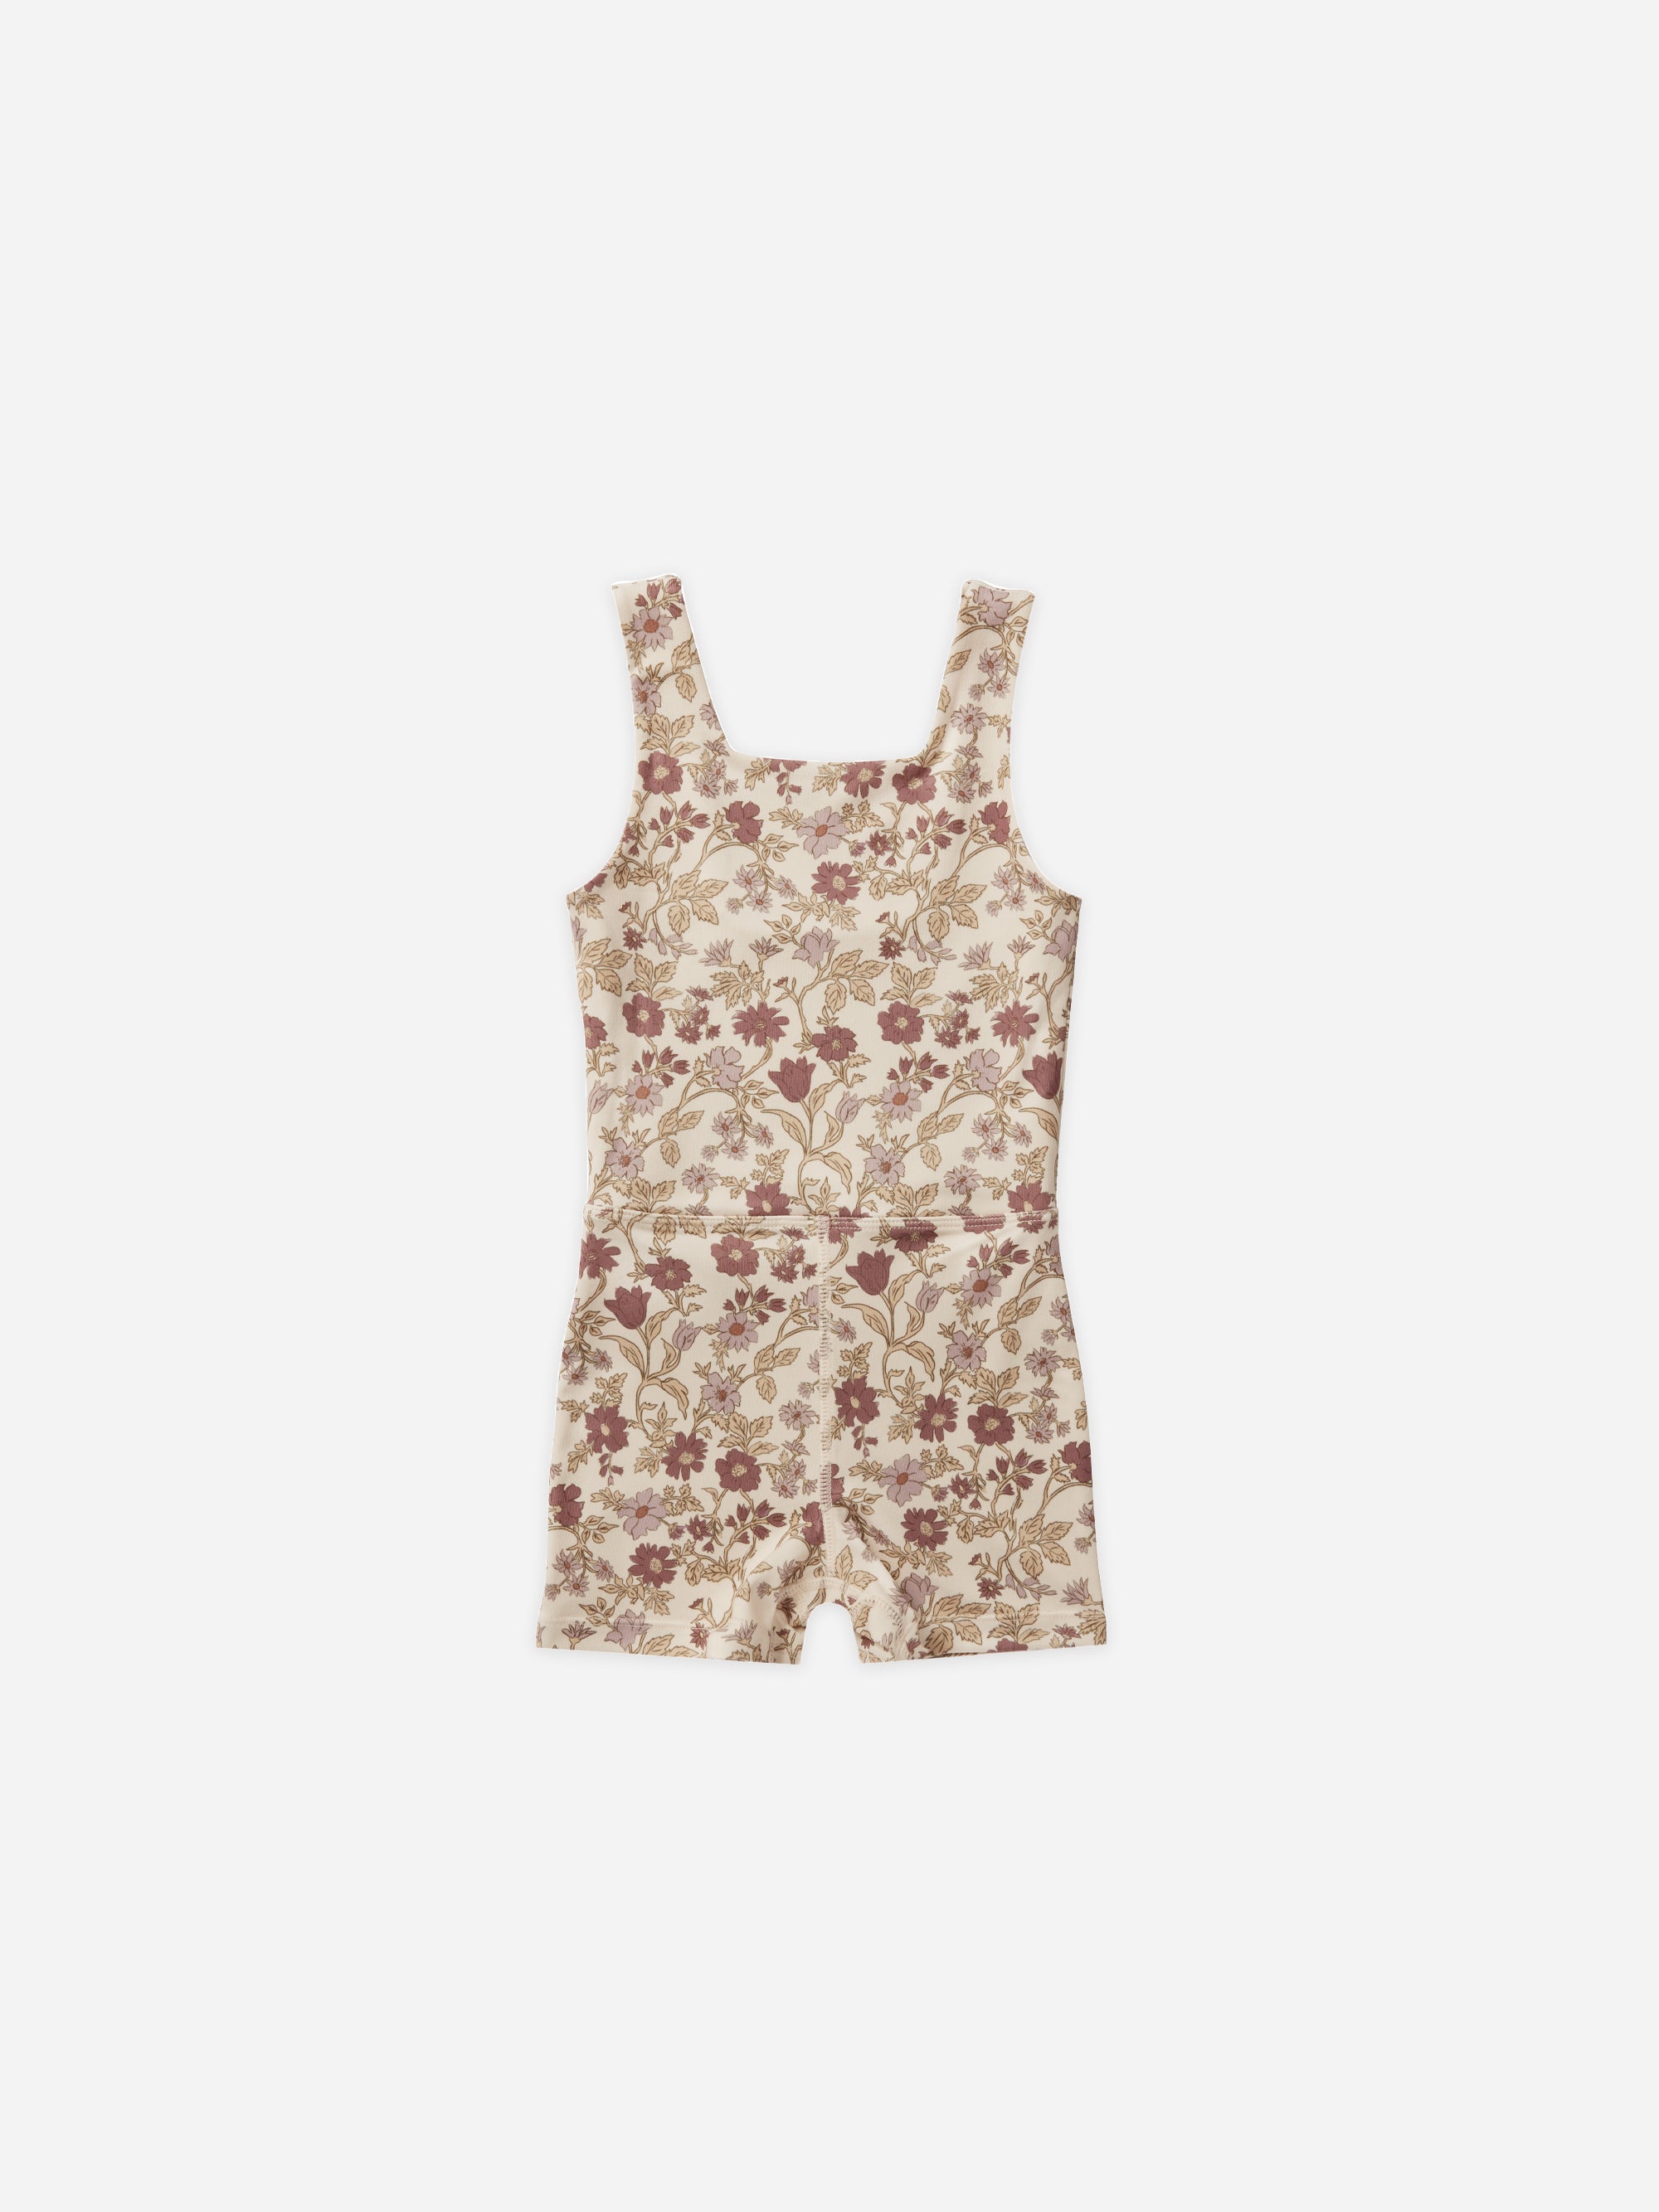 Malibu Bodysuit || Bloom - Rylee + Cru | Kids Clothes | Trendy Baby Clothes | Modern Infant Outfits |